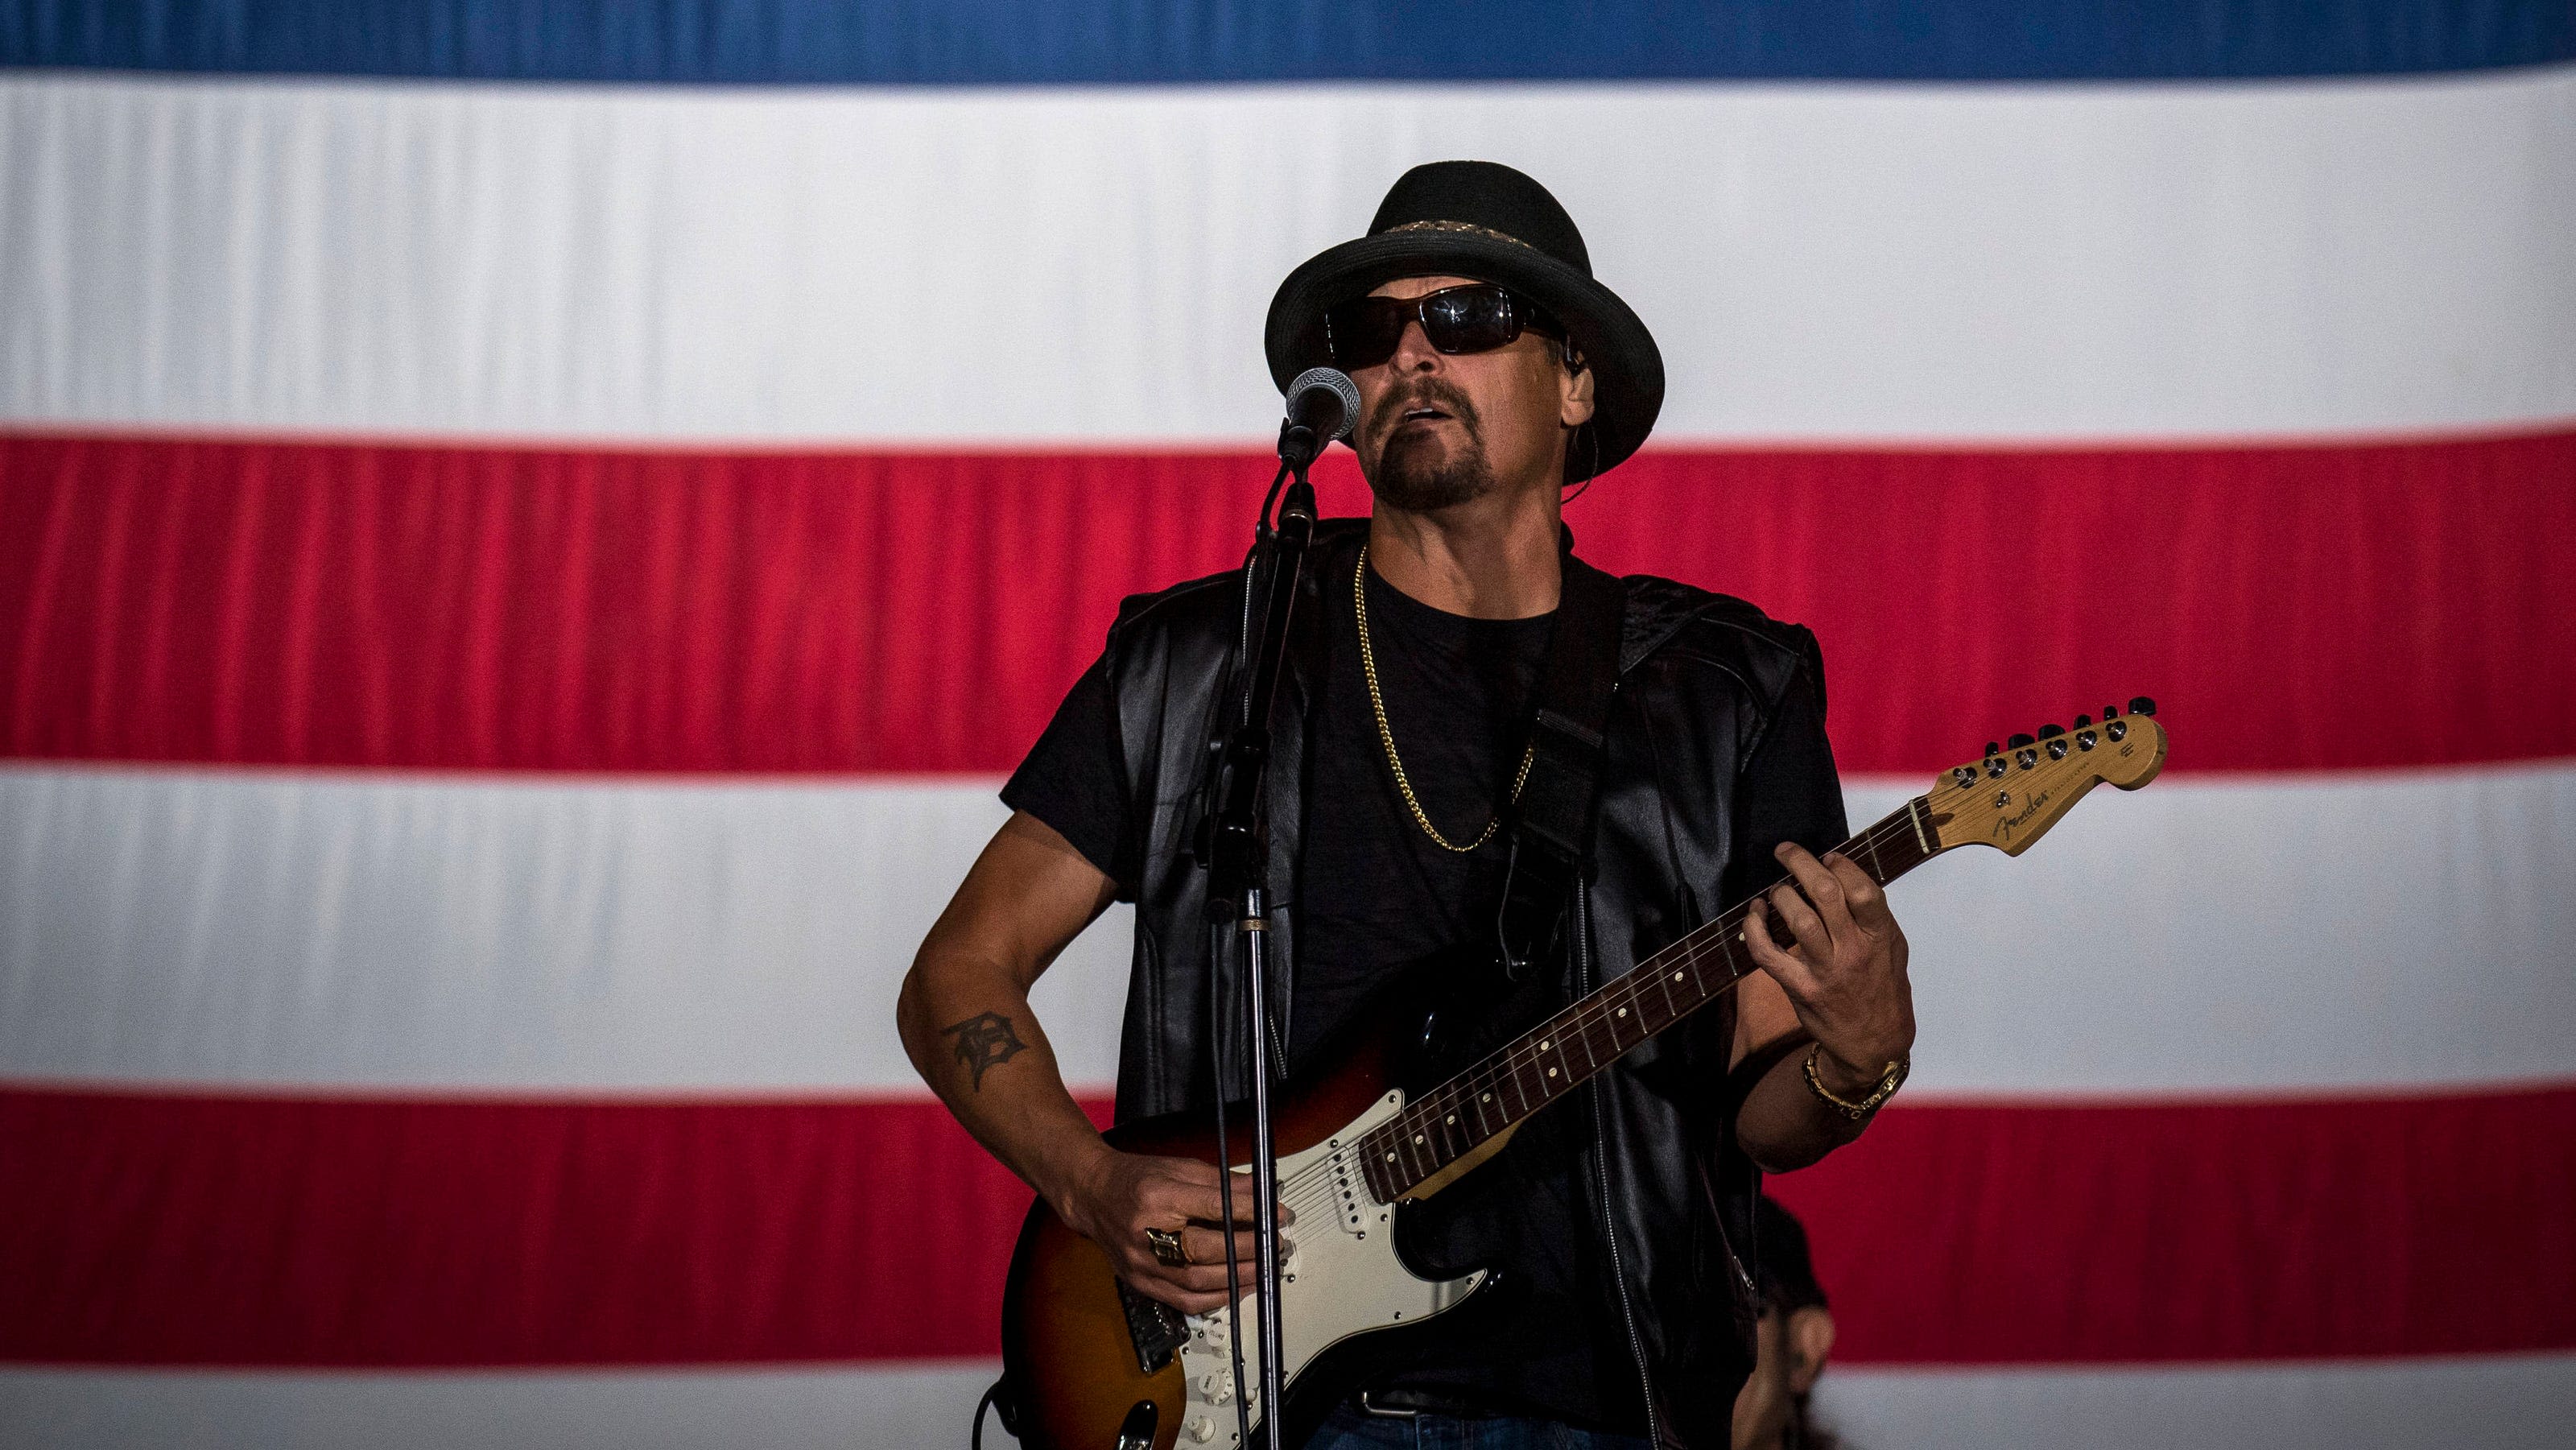 Kid Rock donates $50K to fundraiser for Trump rally shooting victims